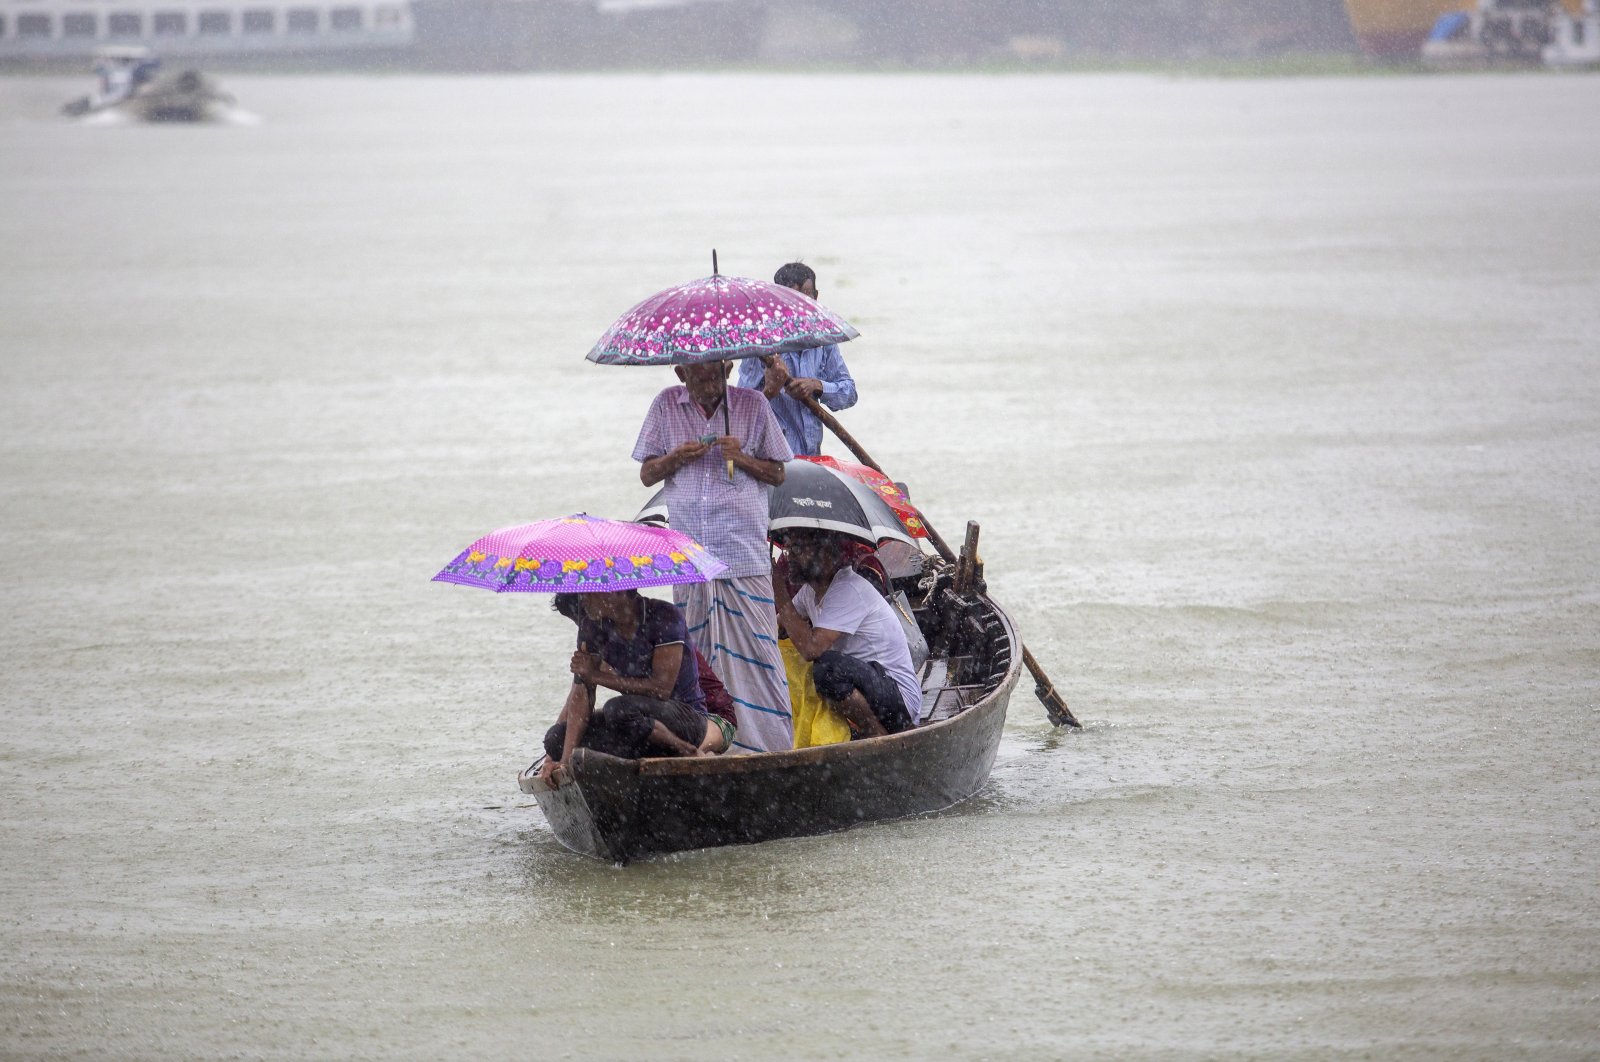 People cross the Buriganga river as they hold umbrellas during heavy rain and rough condition caused by cyclone Sitrang, Dhaka, Bangladesh, Oct. 24, 2022. (EPA Photo)